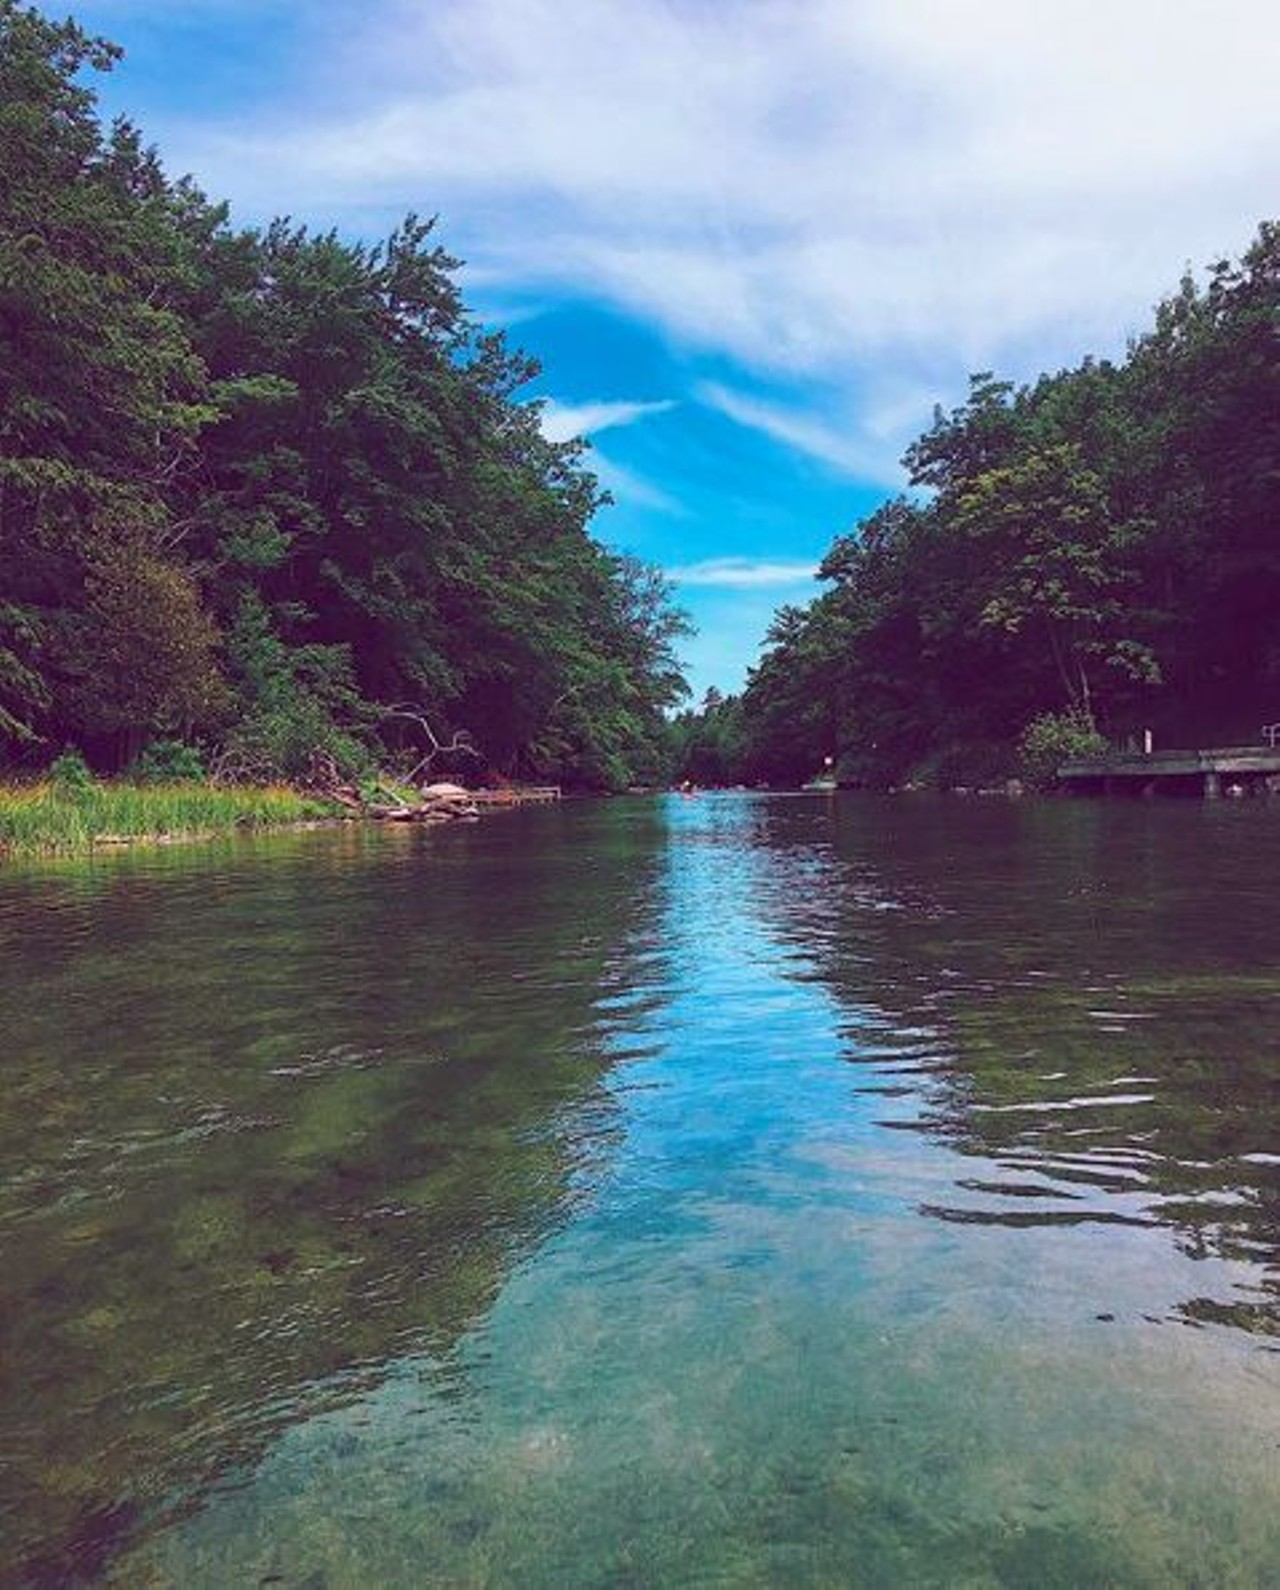 Platte River
Honor
While this may not be the craziest adventure you will go on, it will most likely be one of the most relaxing. After you pick up a tube at Riverside Canoes, this slow moving river will take you on a trip all the way to Lake Michigan. 
Photo via IG user @what.katiedid